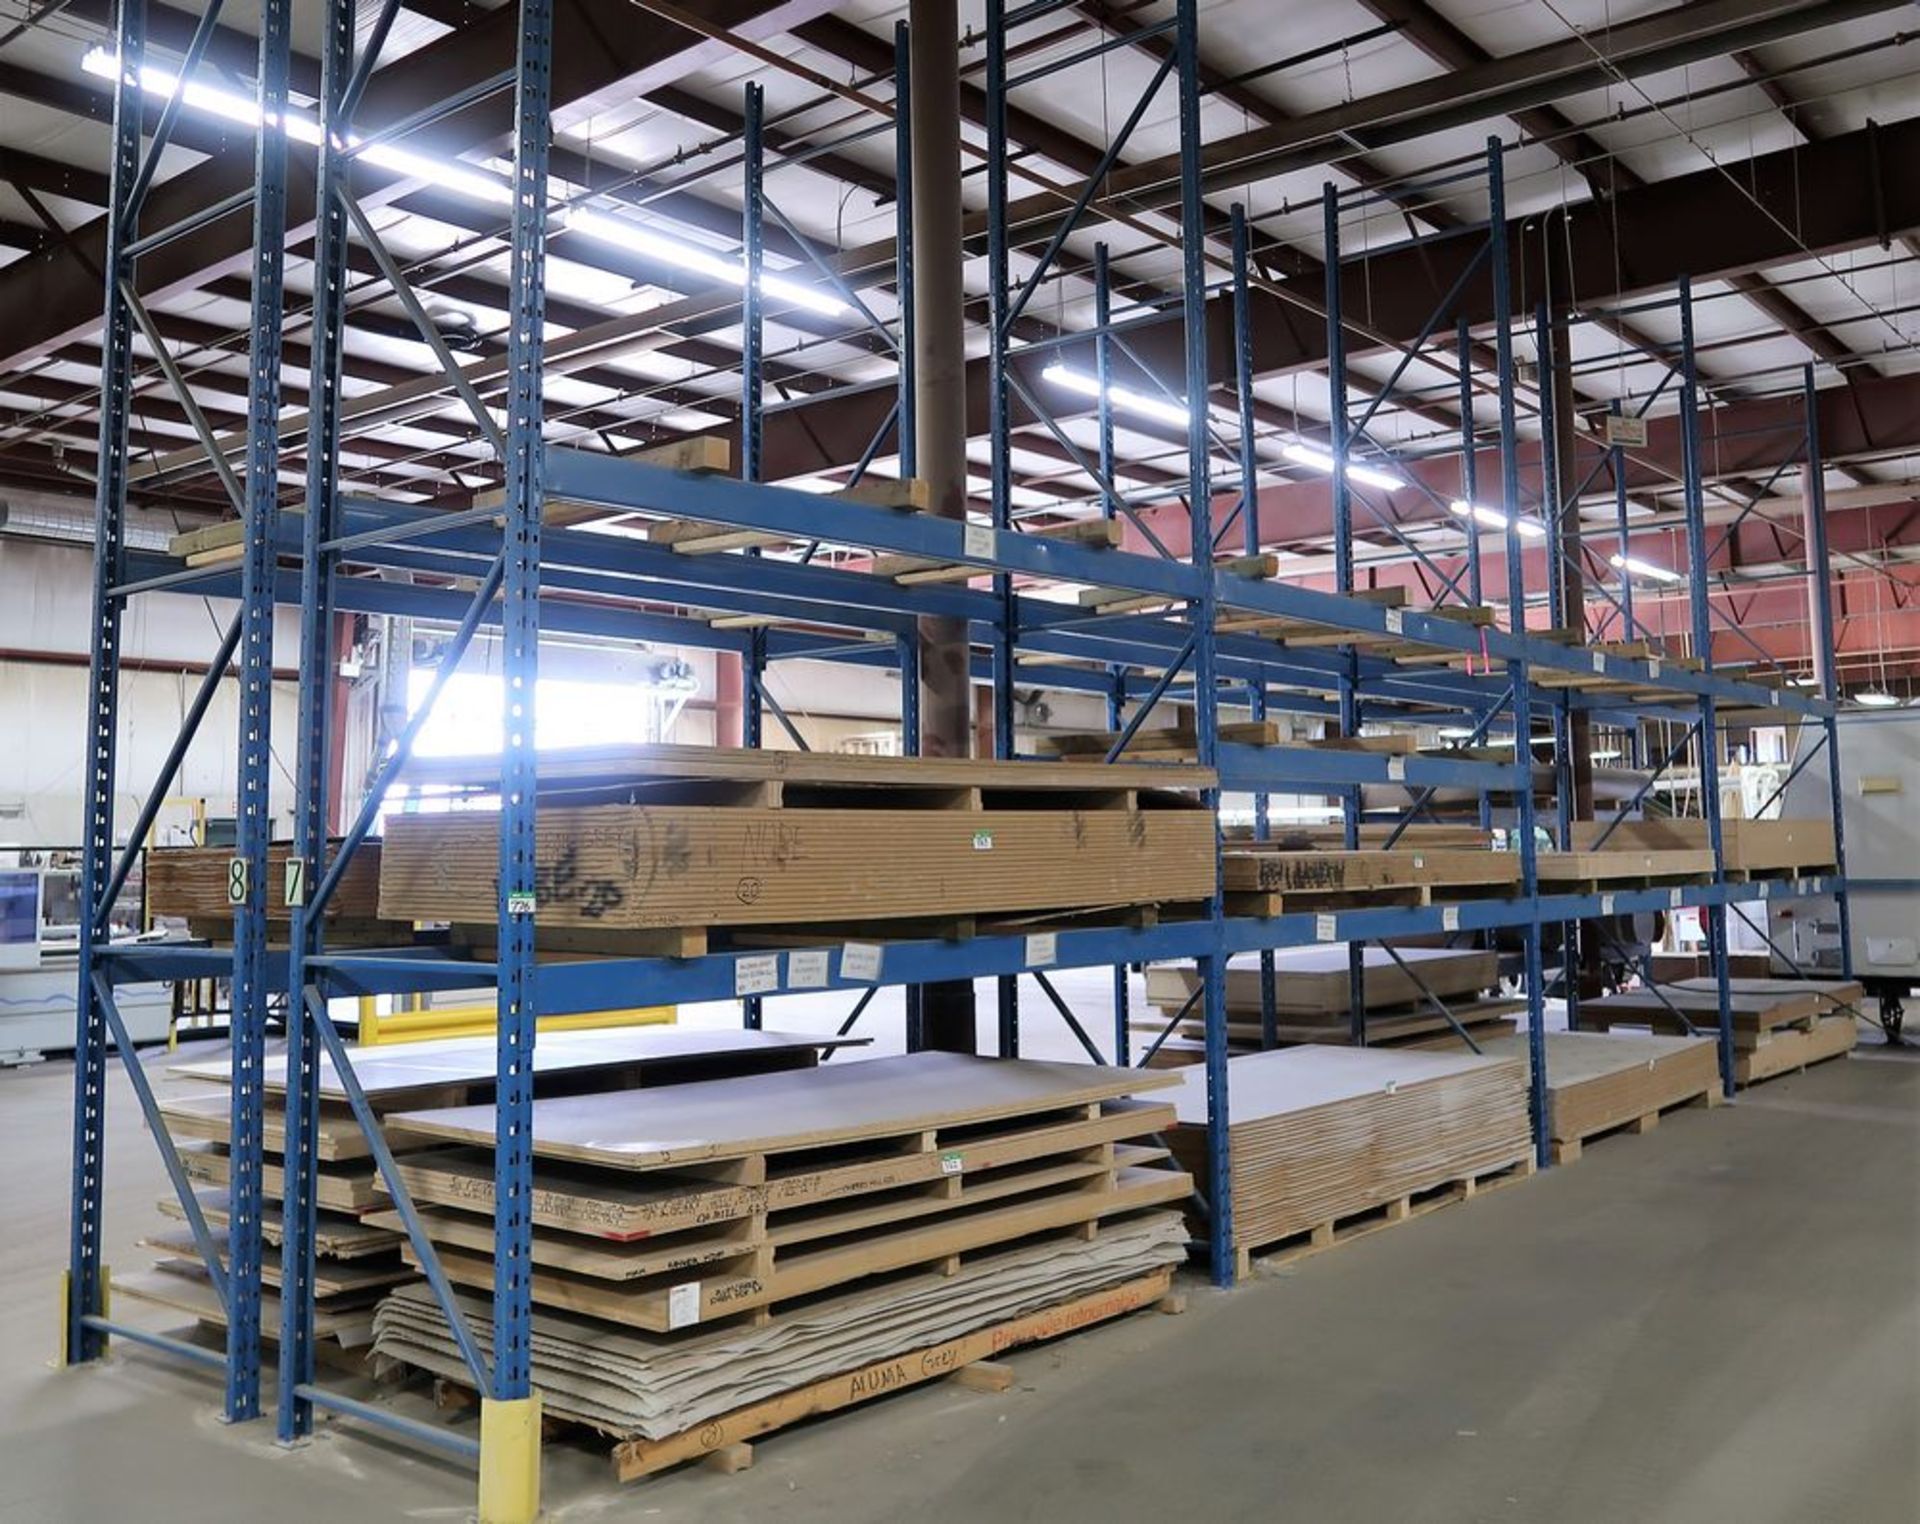 4 SECTIONS OF 18' HIGH PALLET RACKING, 10' SECTIONS